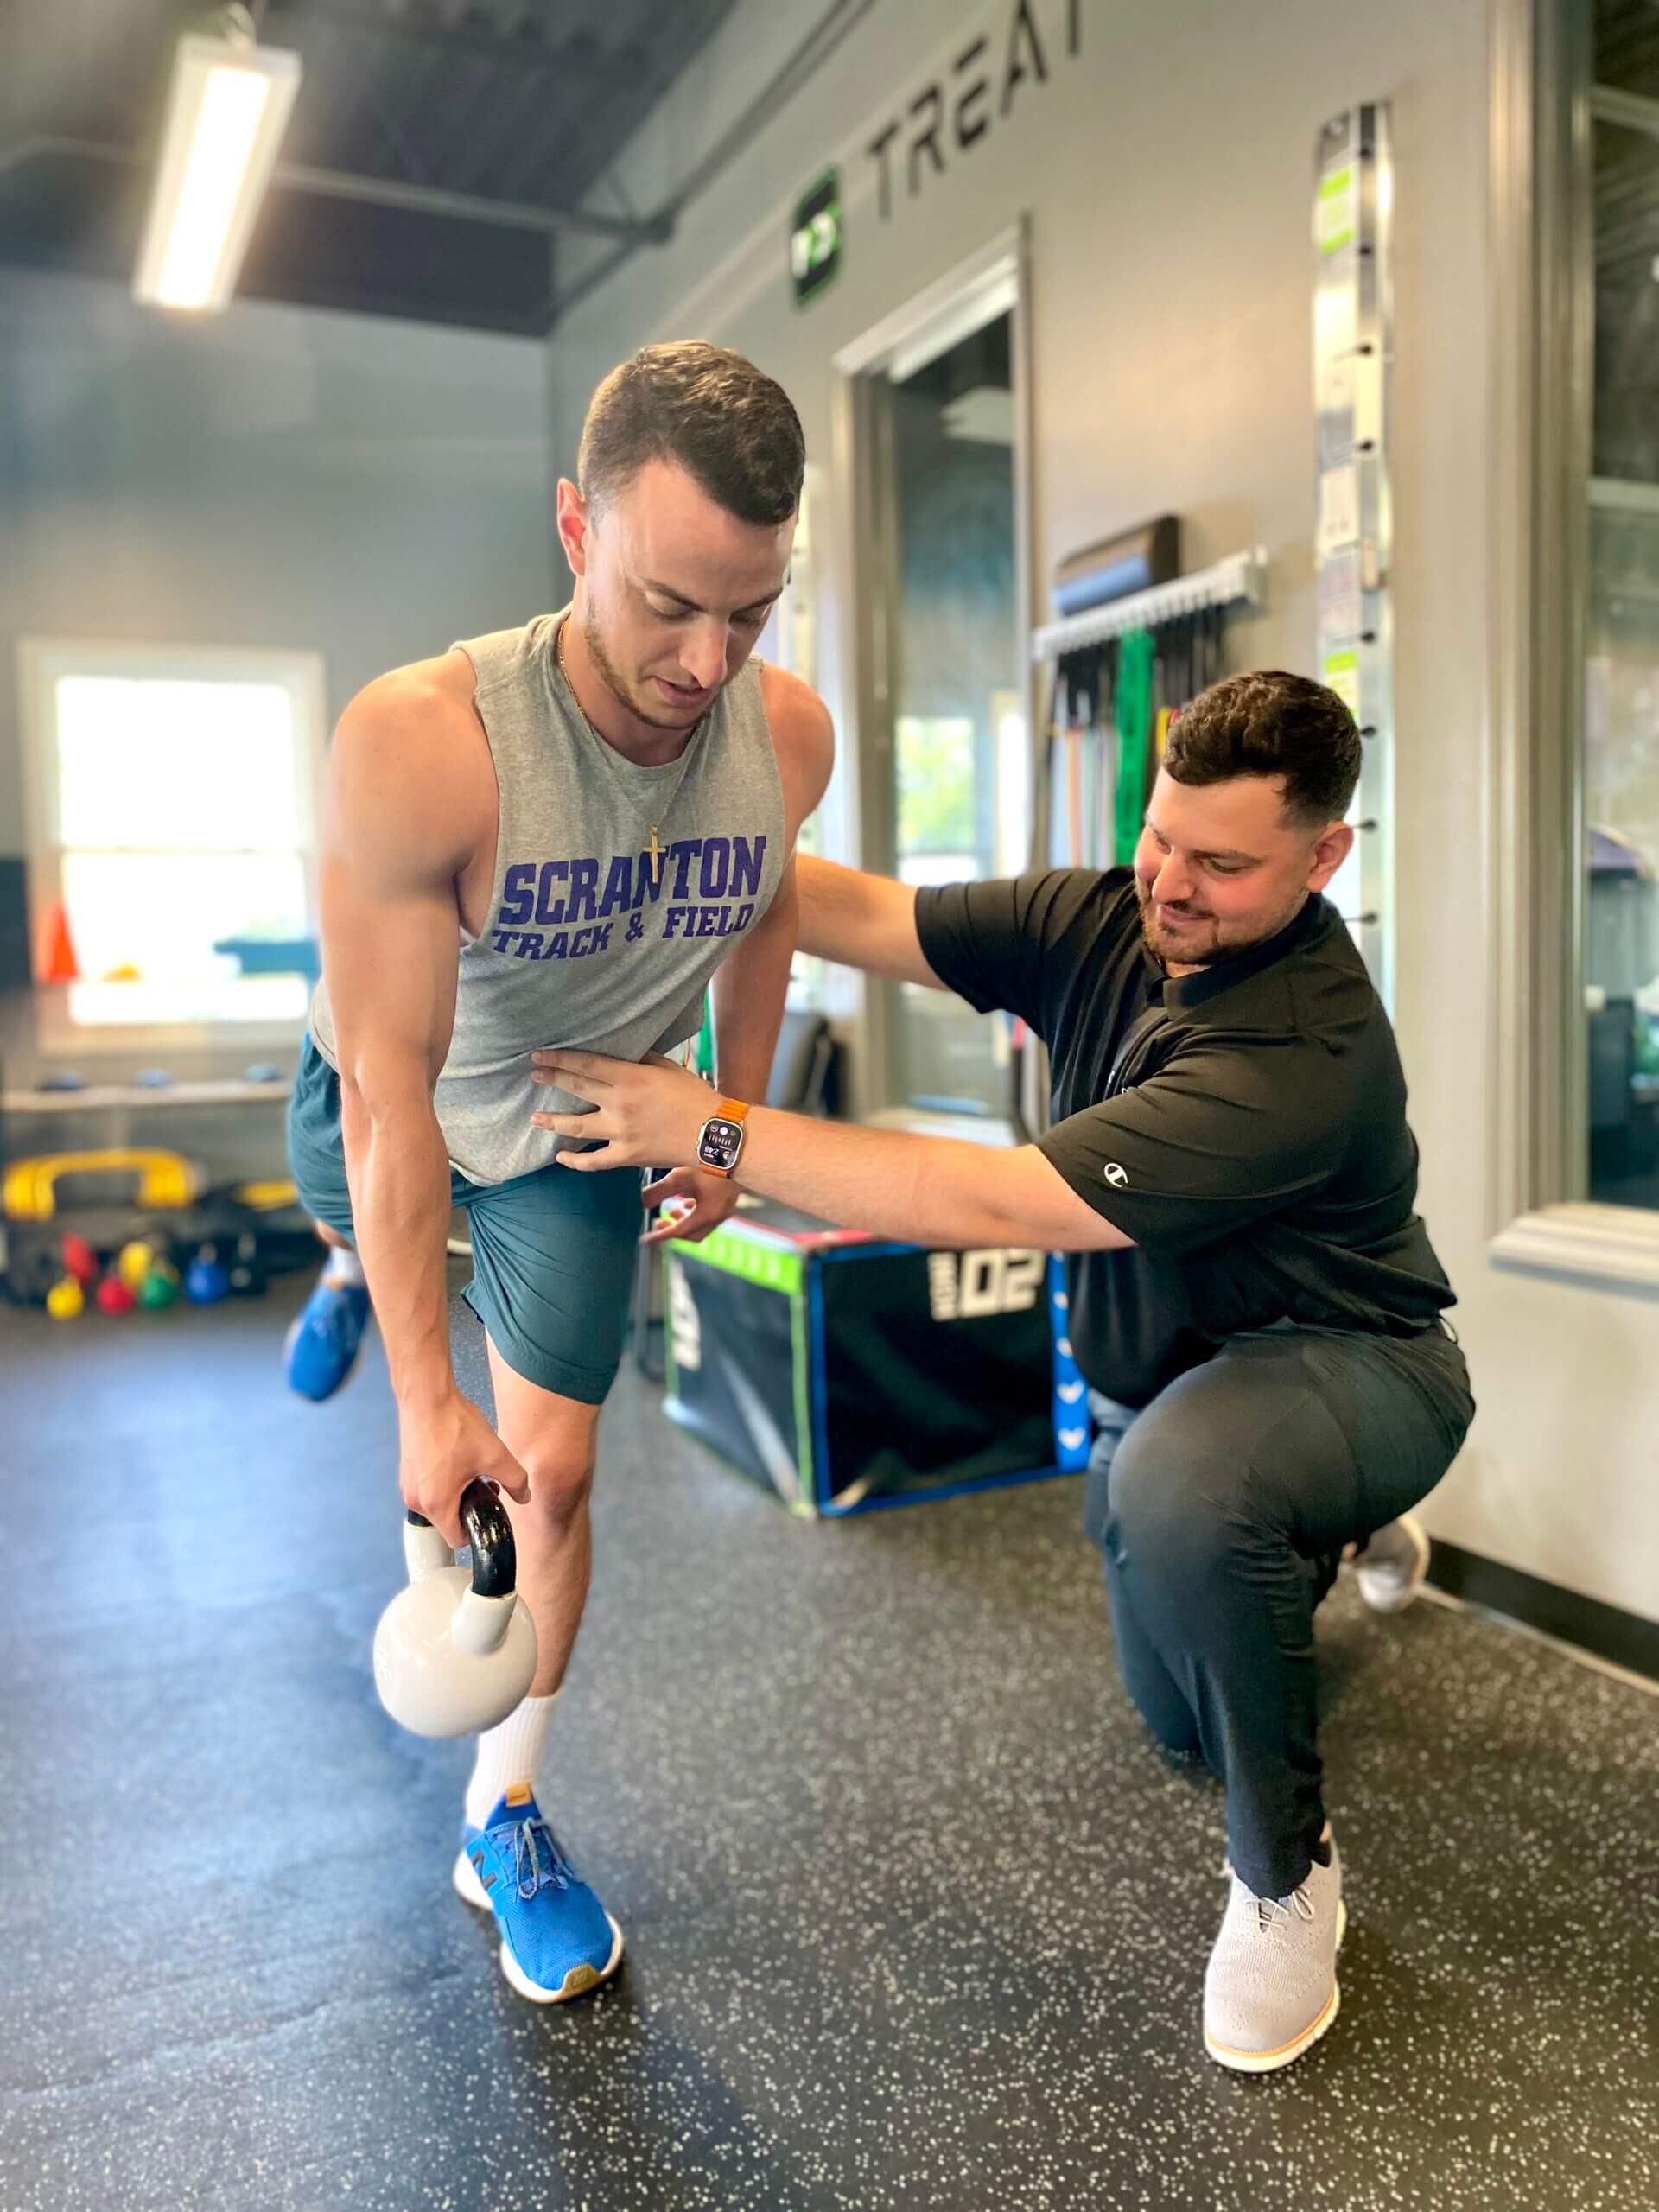 ProClinix Sports Physical Therapy & Chiropractic - Dr John Shlimoun, PT, DPT ensuring this patient has adequate form when performing single leg deadlifts